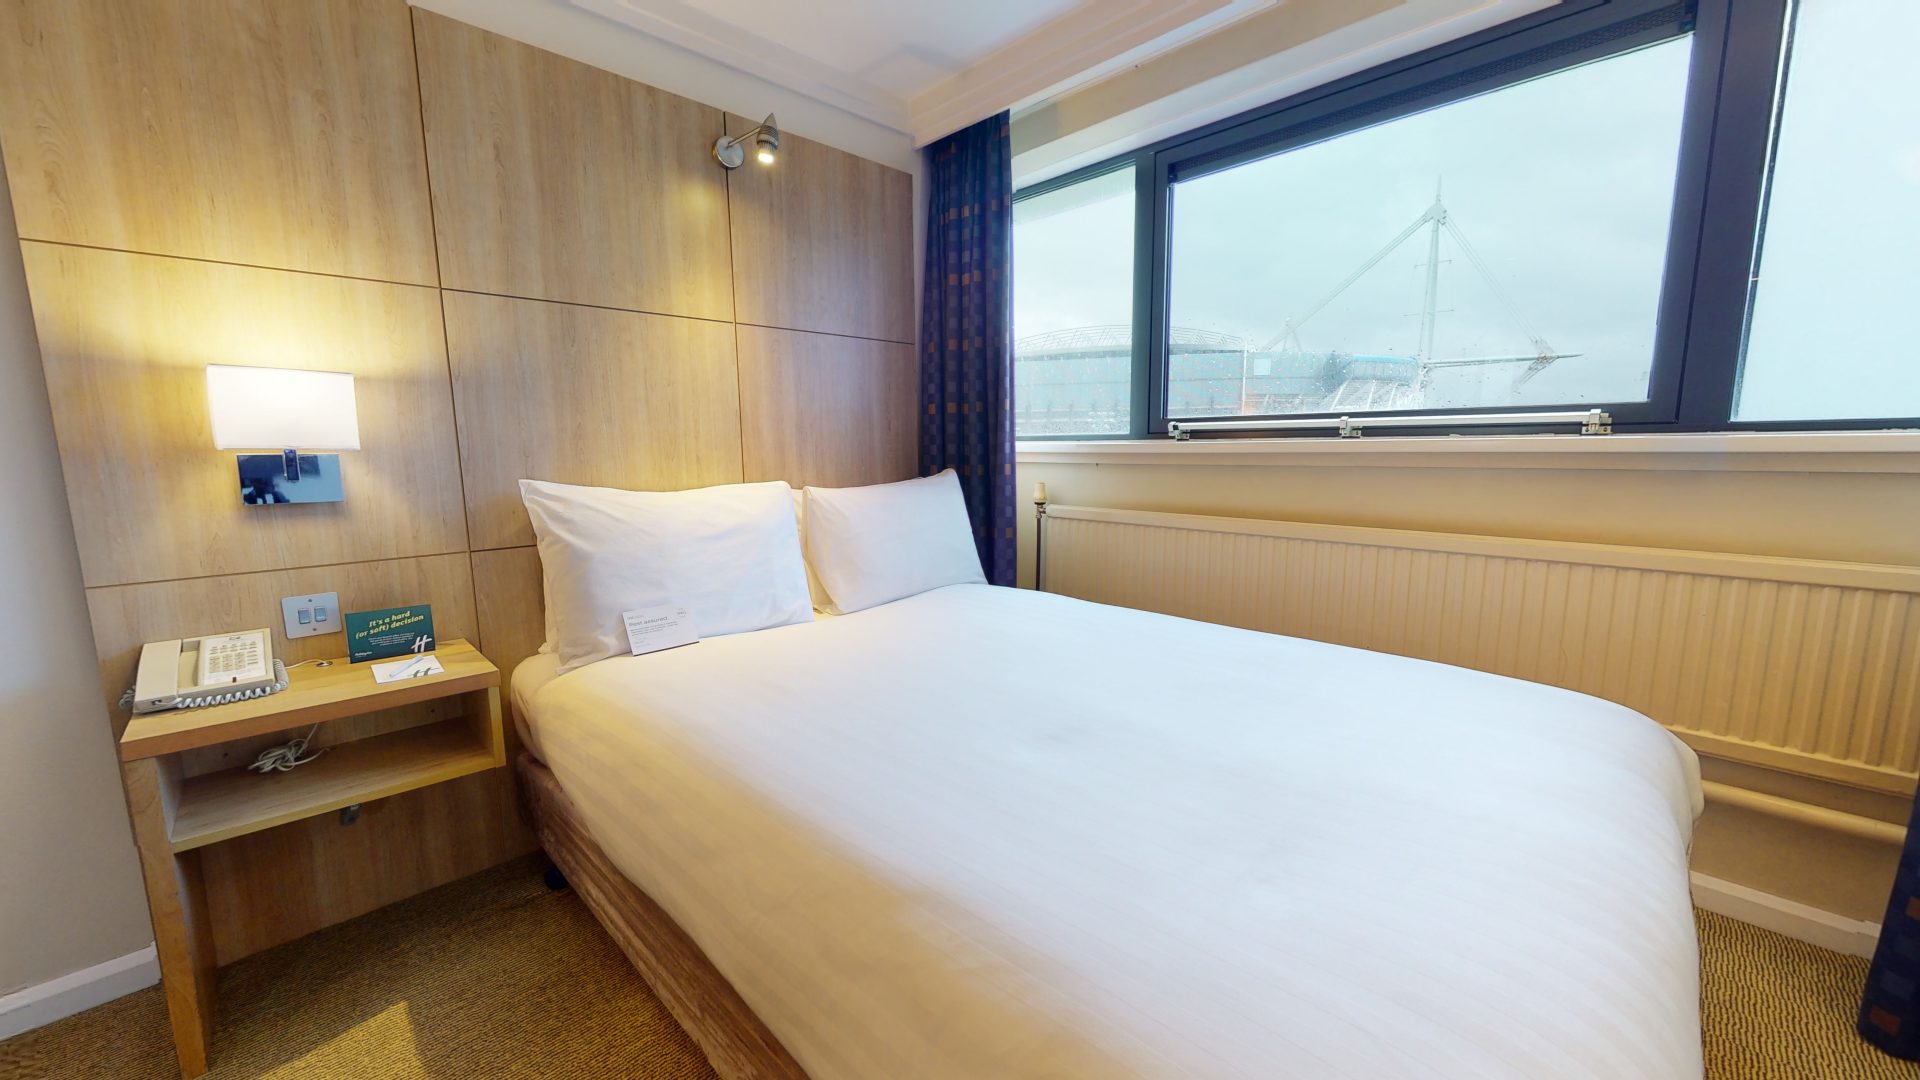 Holiday Inn Cardiff City, Cardiff : -27% during the day 